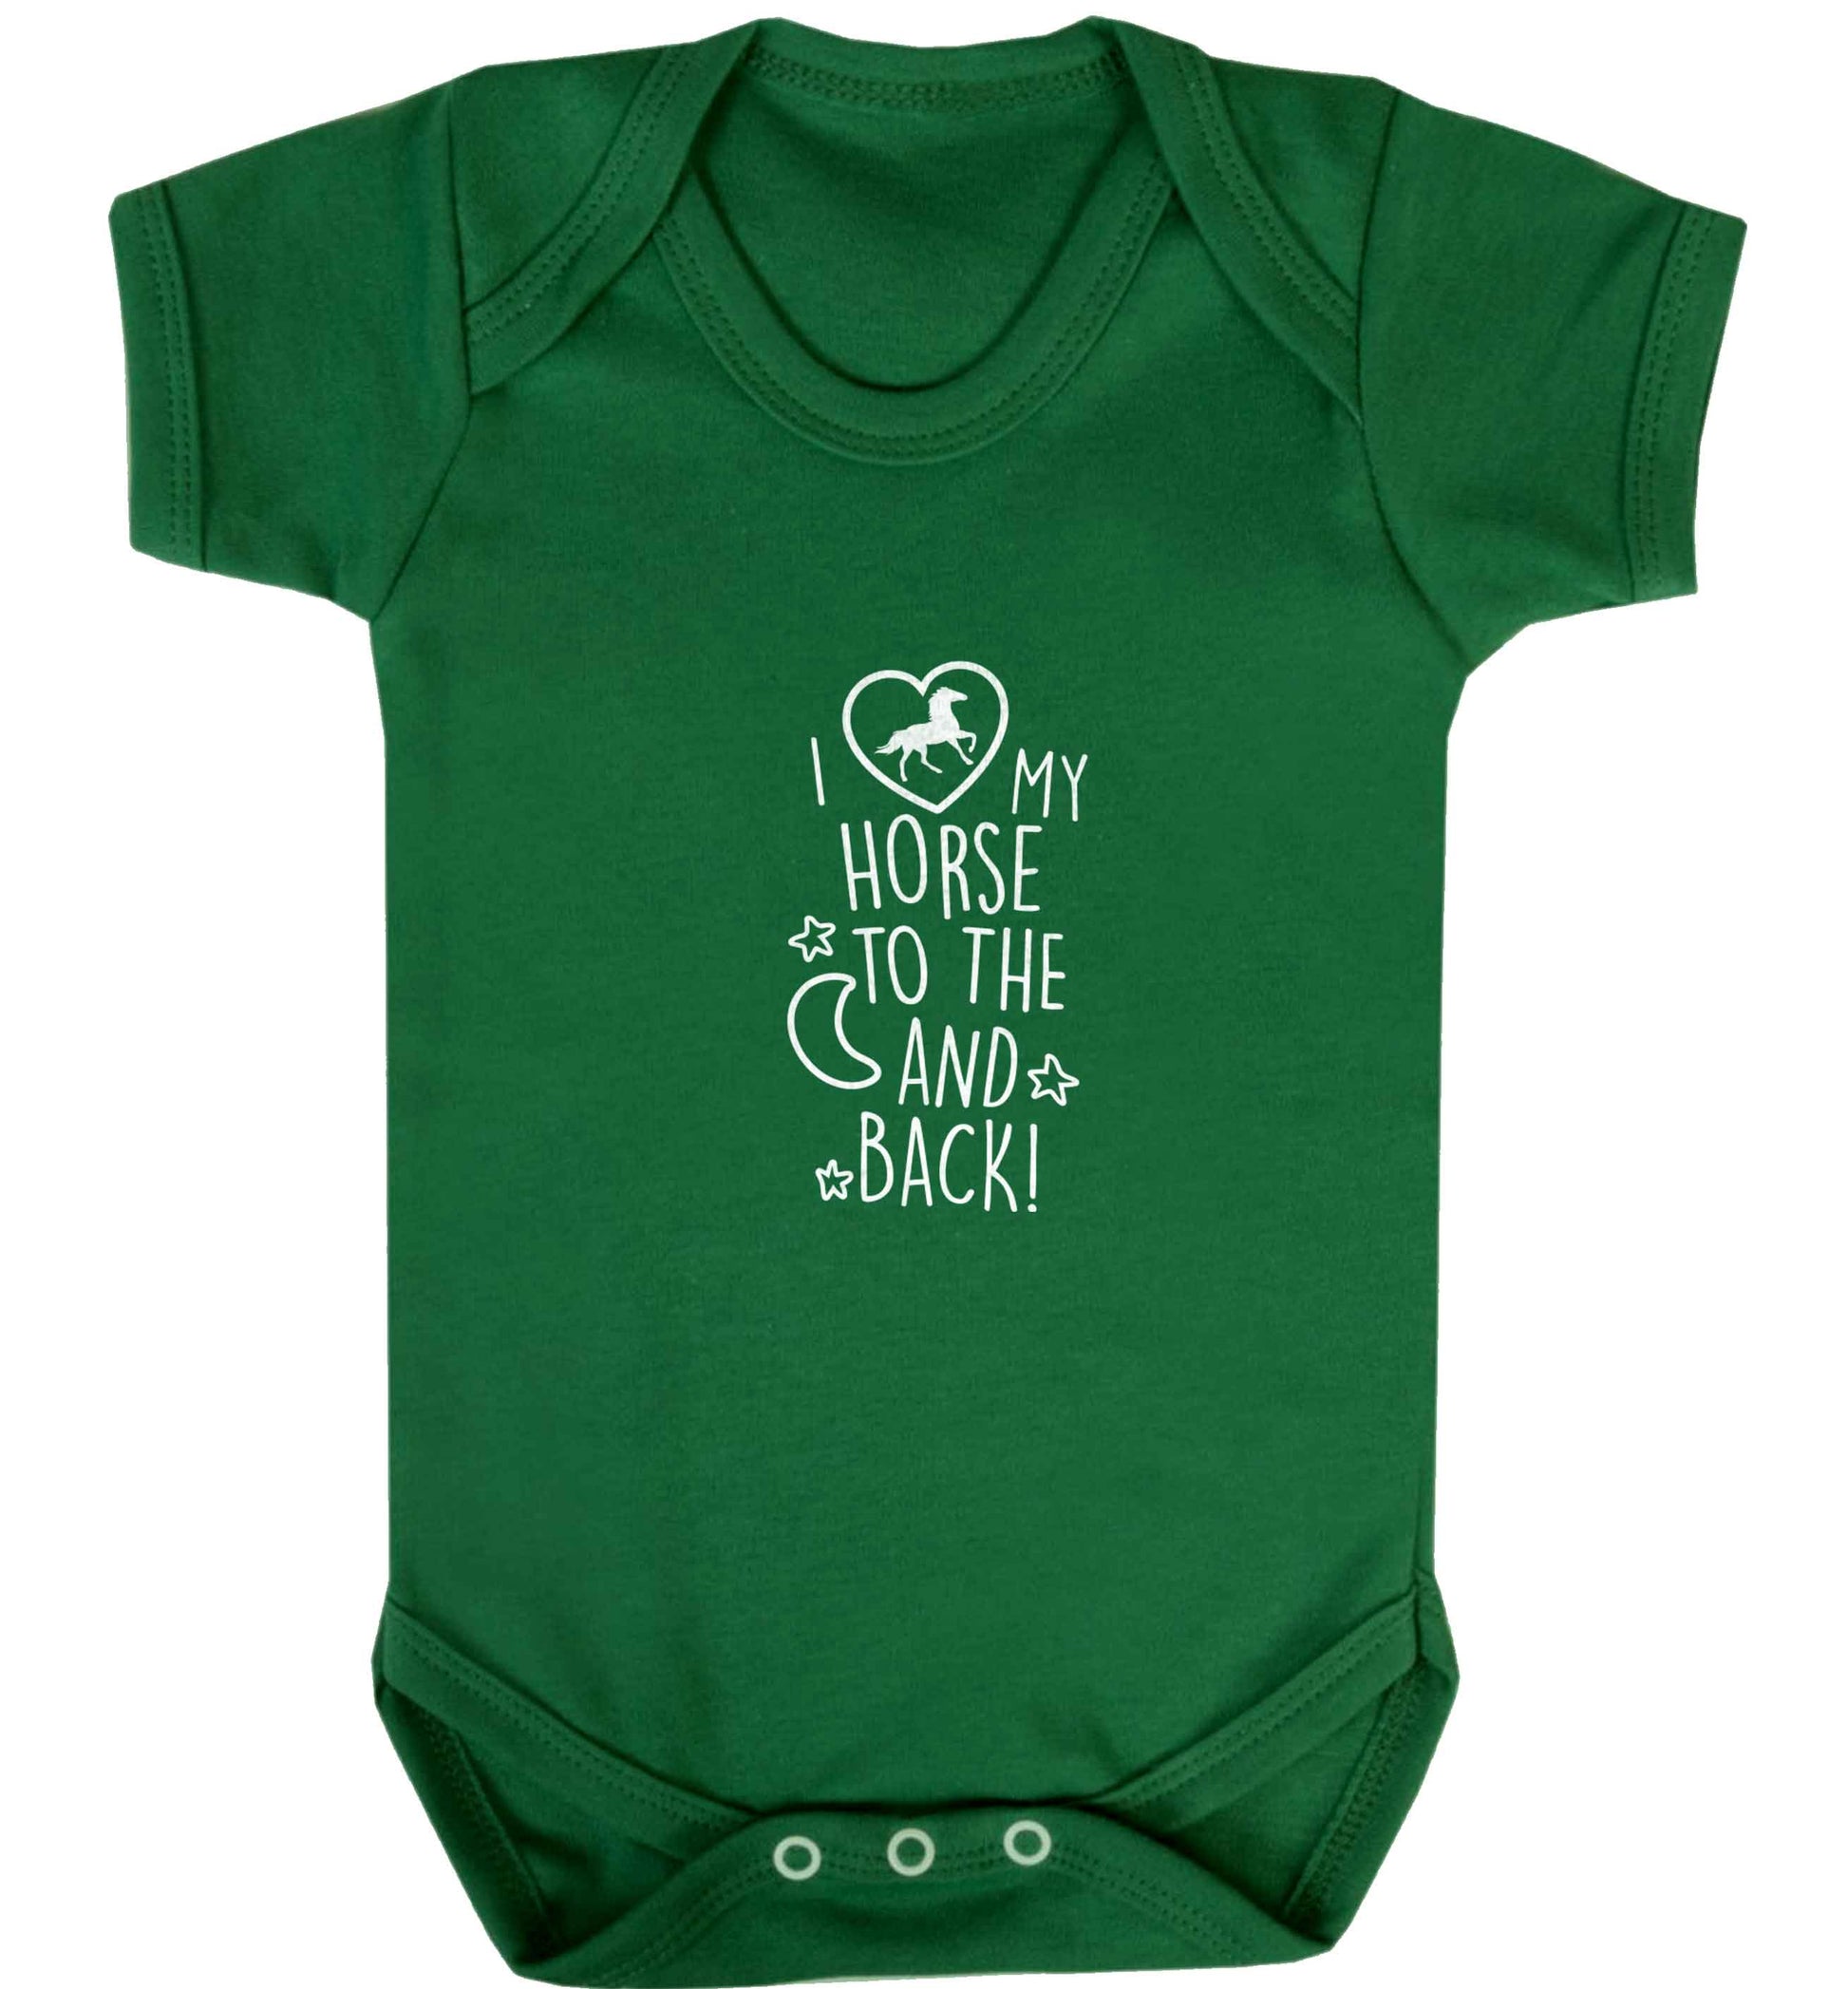 I love my horse to the moon and back baby vest green 18-24 months